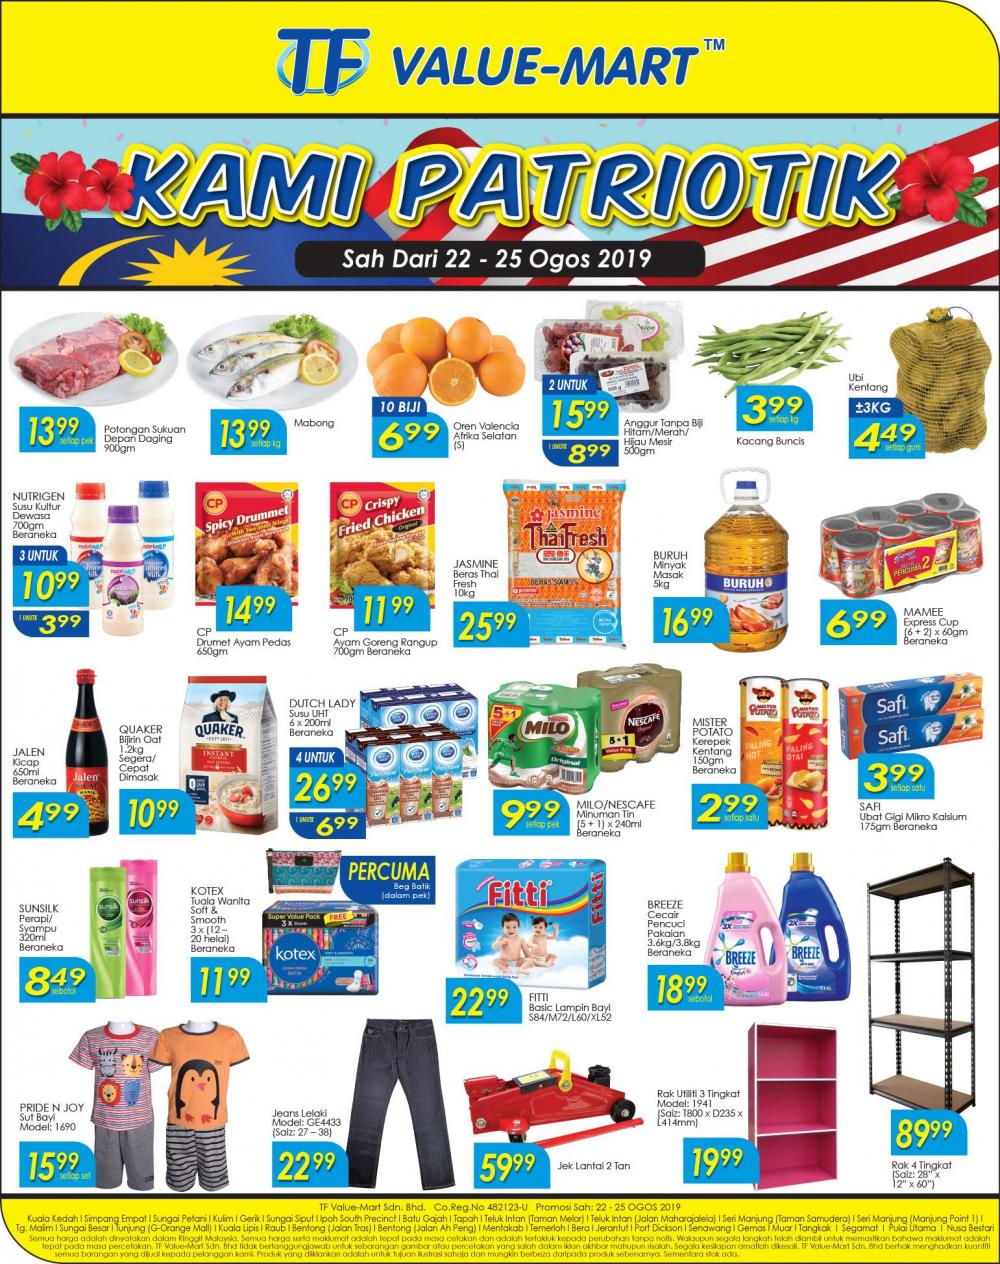 TF Value-Mart Weekend Promotion (22 August 2019 - 25 August 2019)